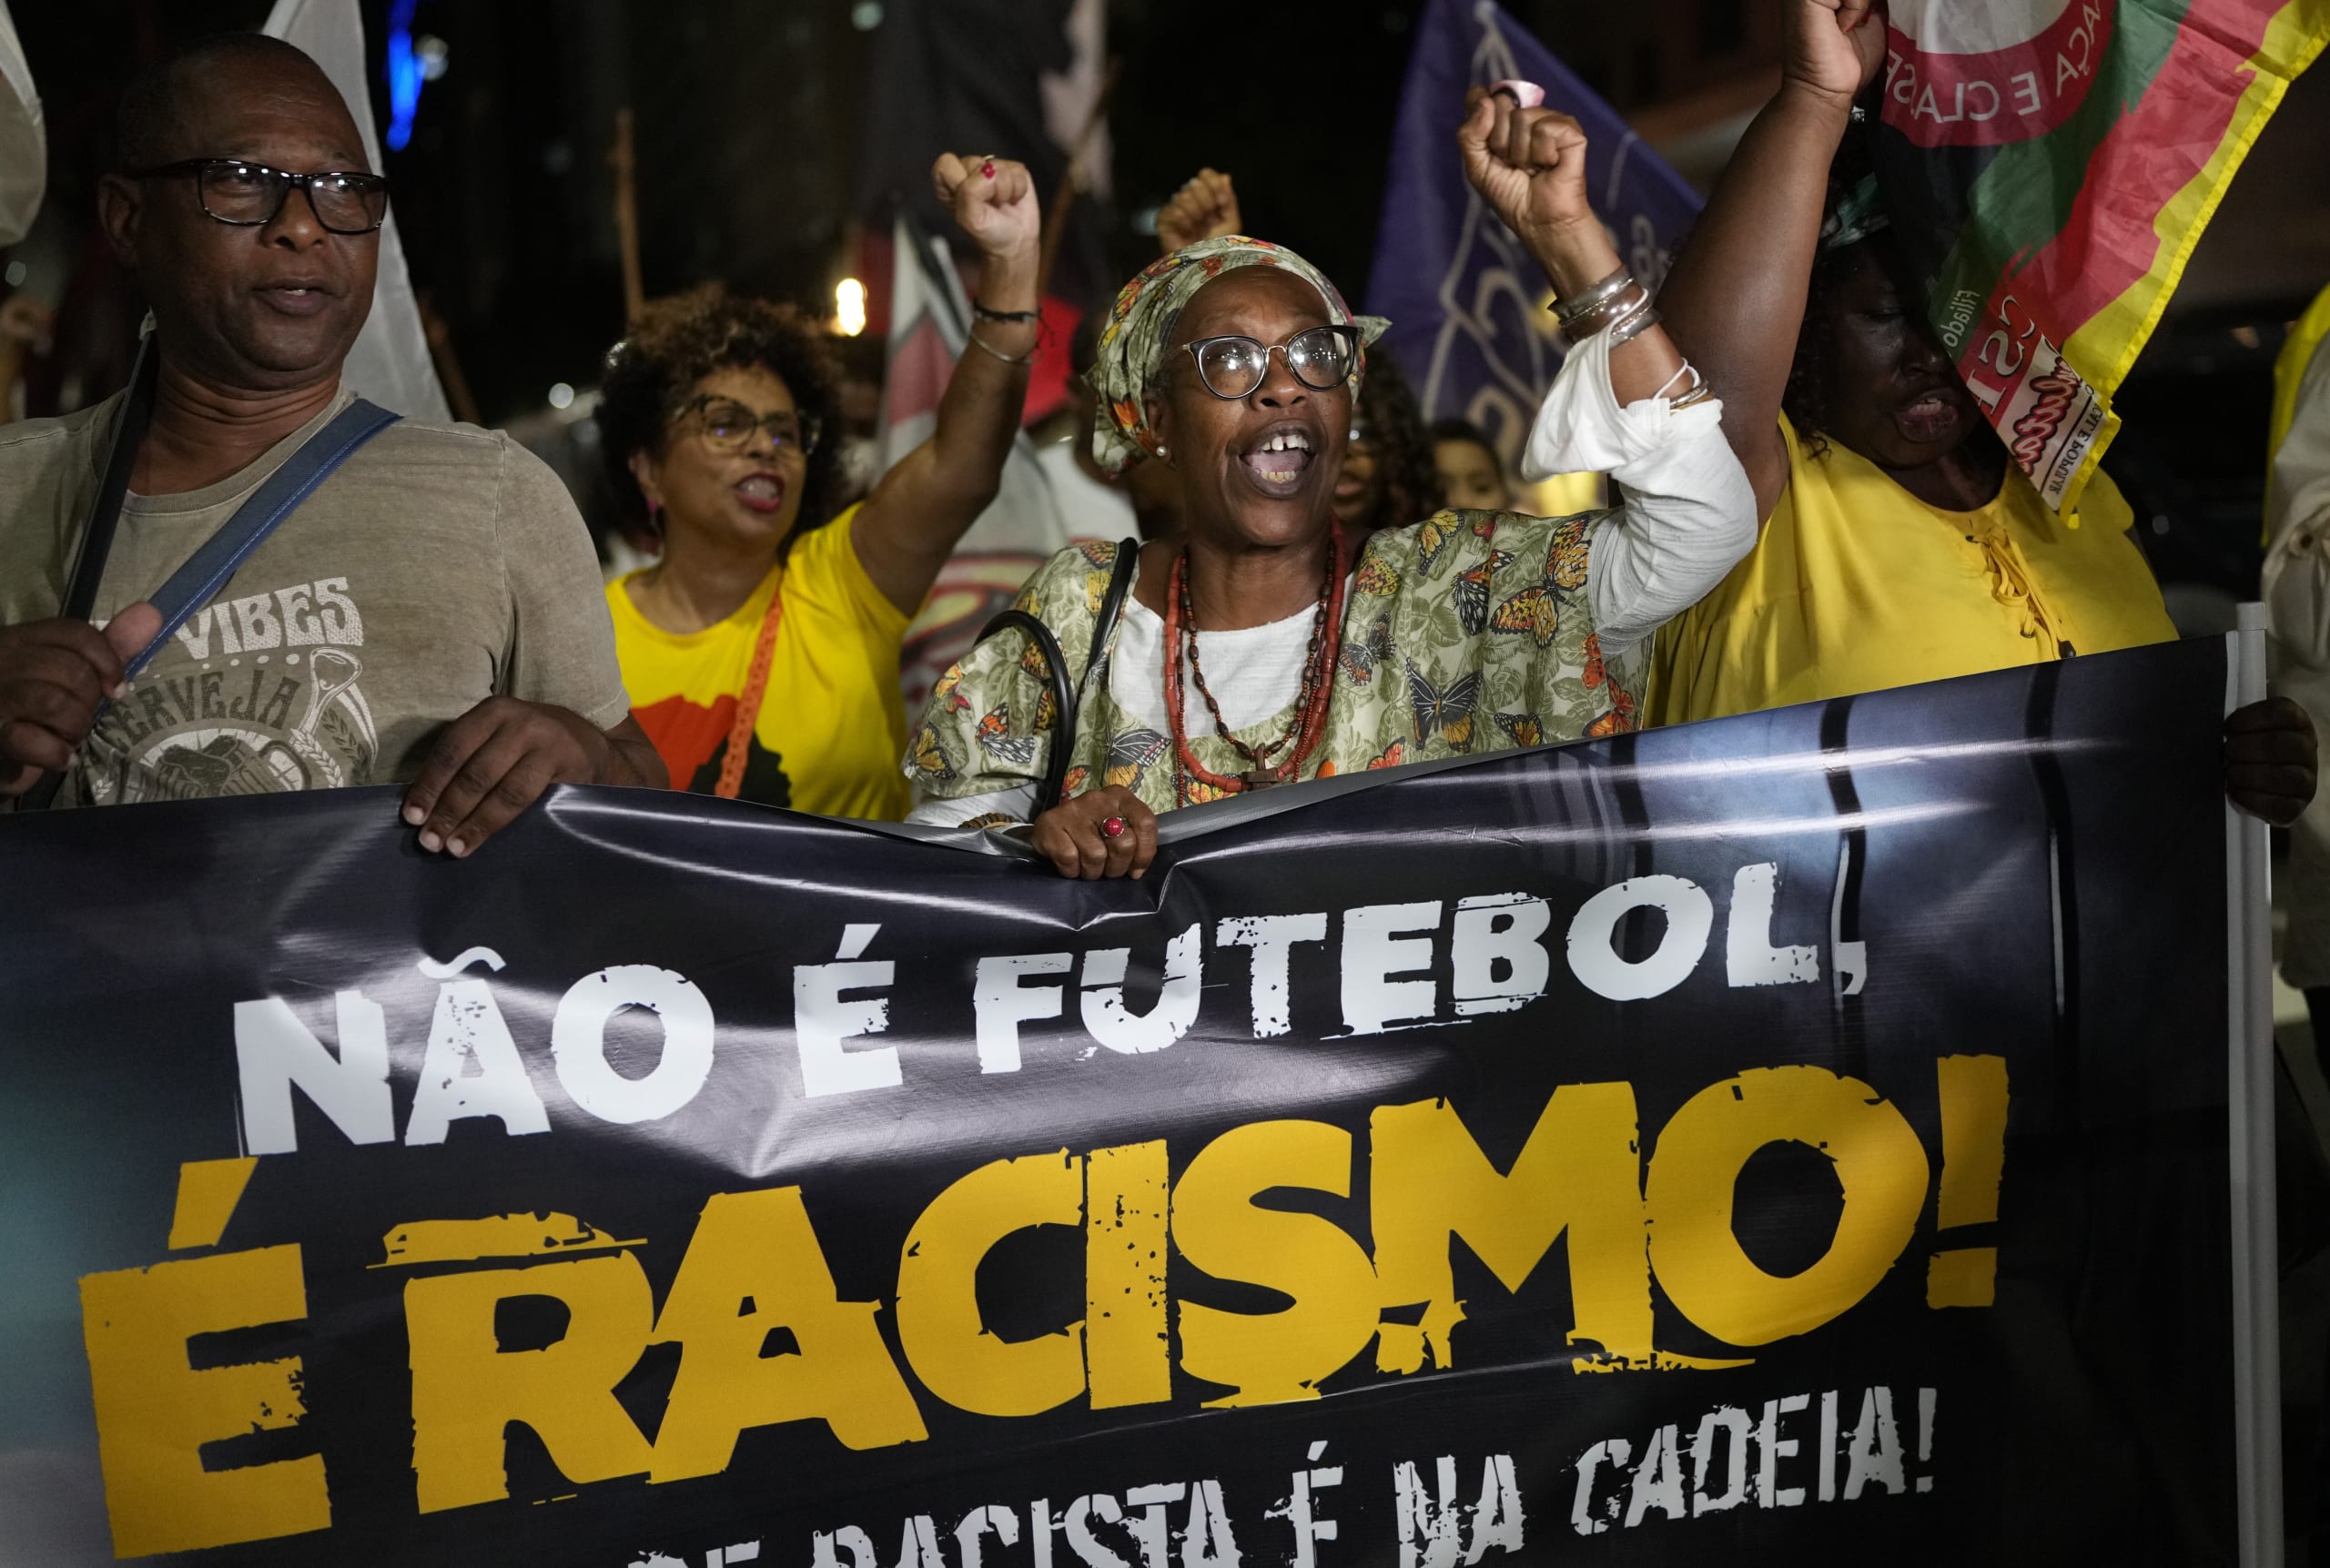 Disgusted by racism targeting soccer’s Vinícius, his Brazilian hometown rallies to defend him